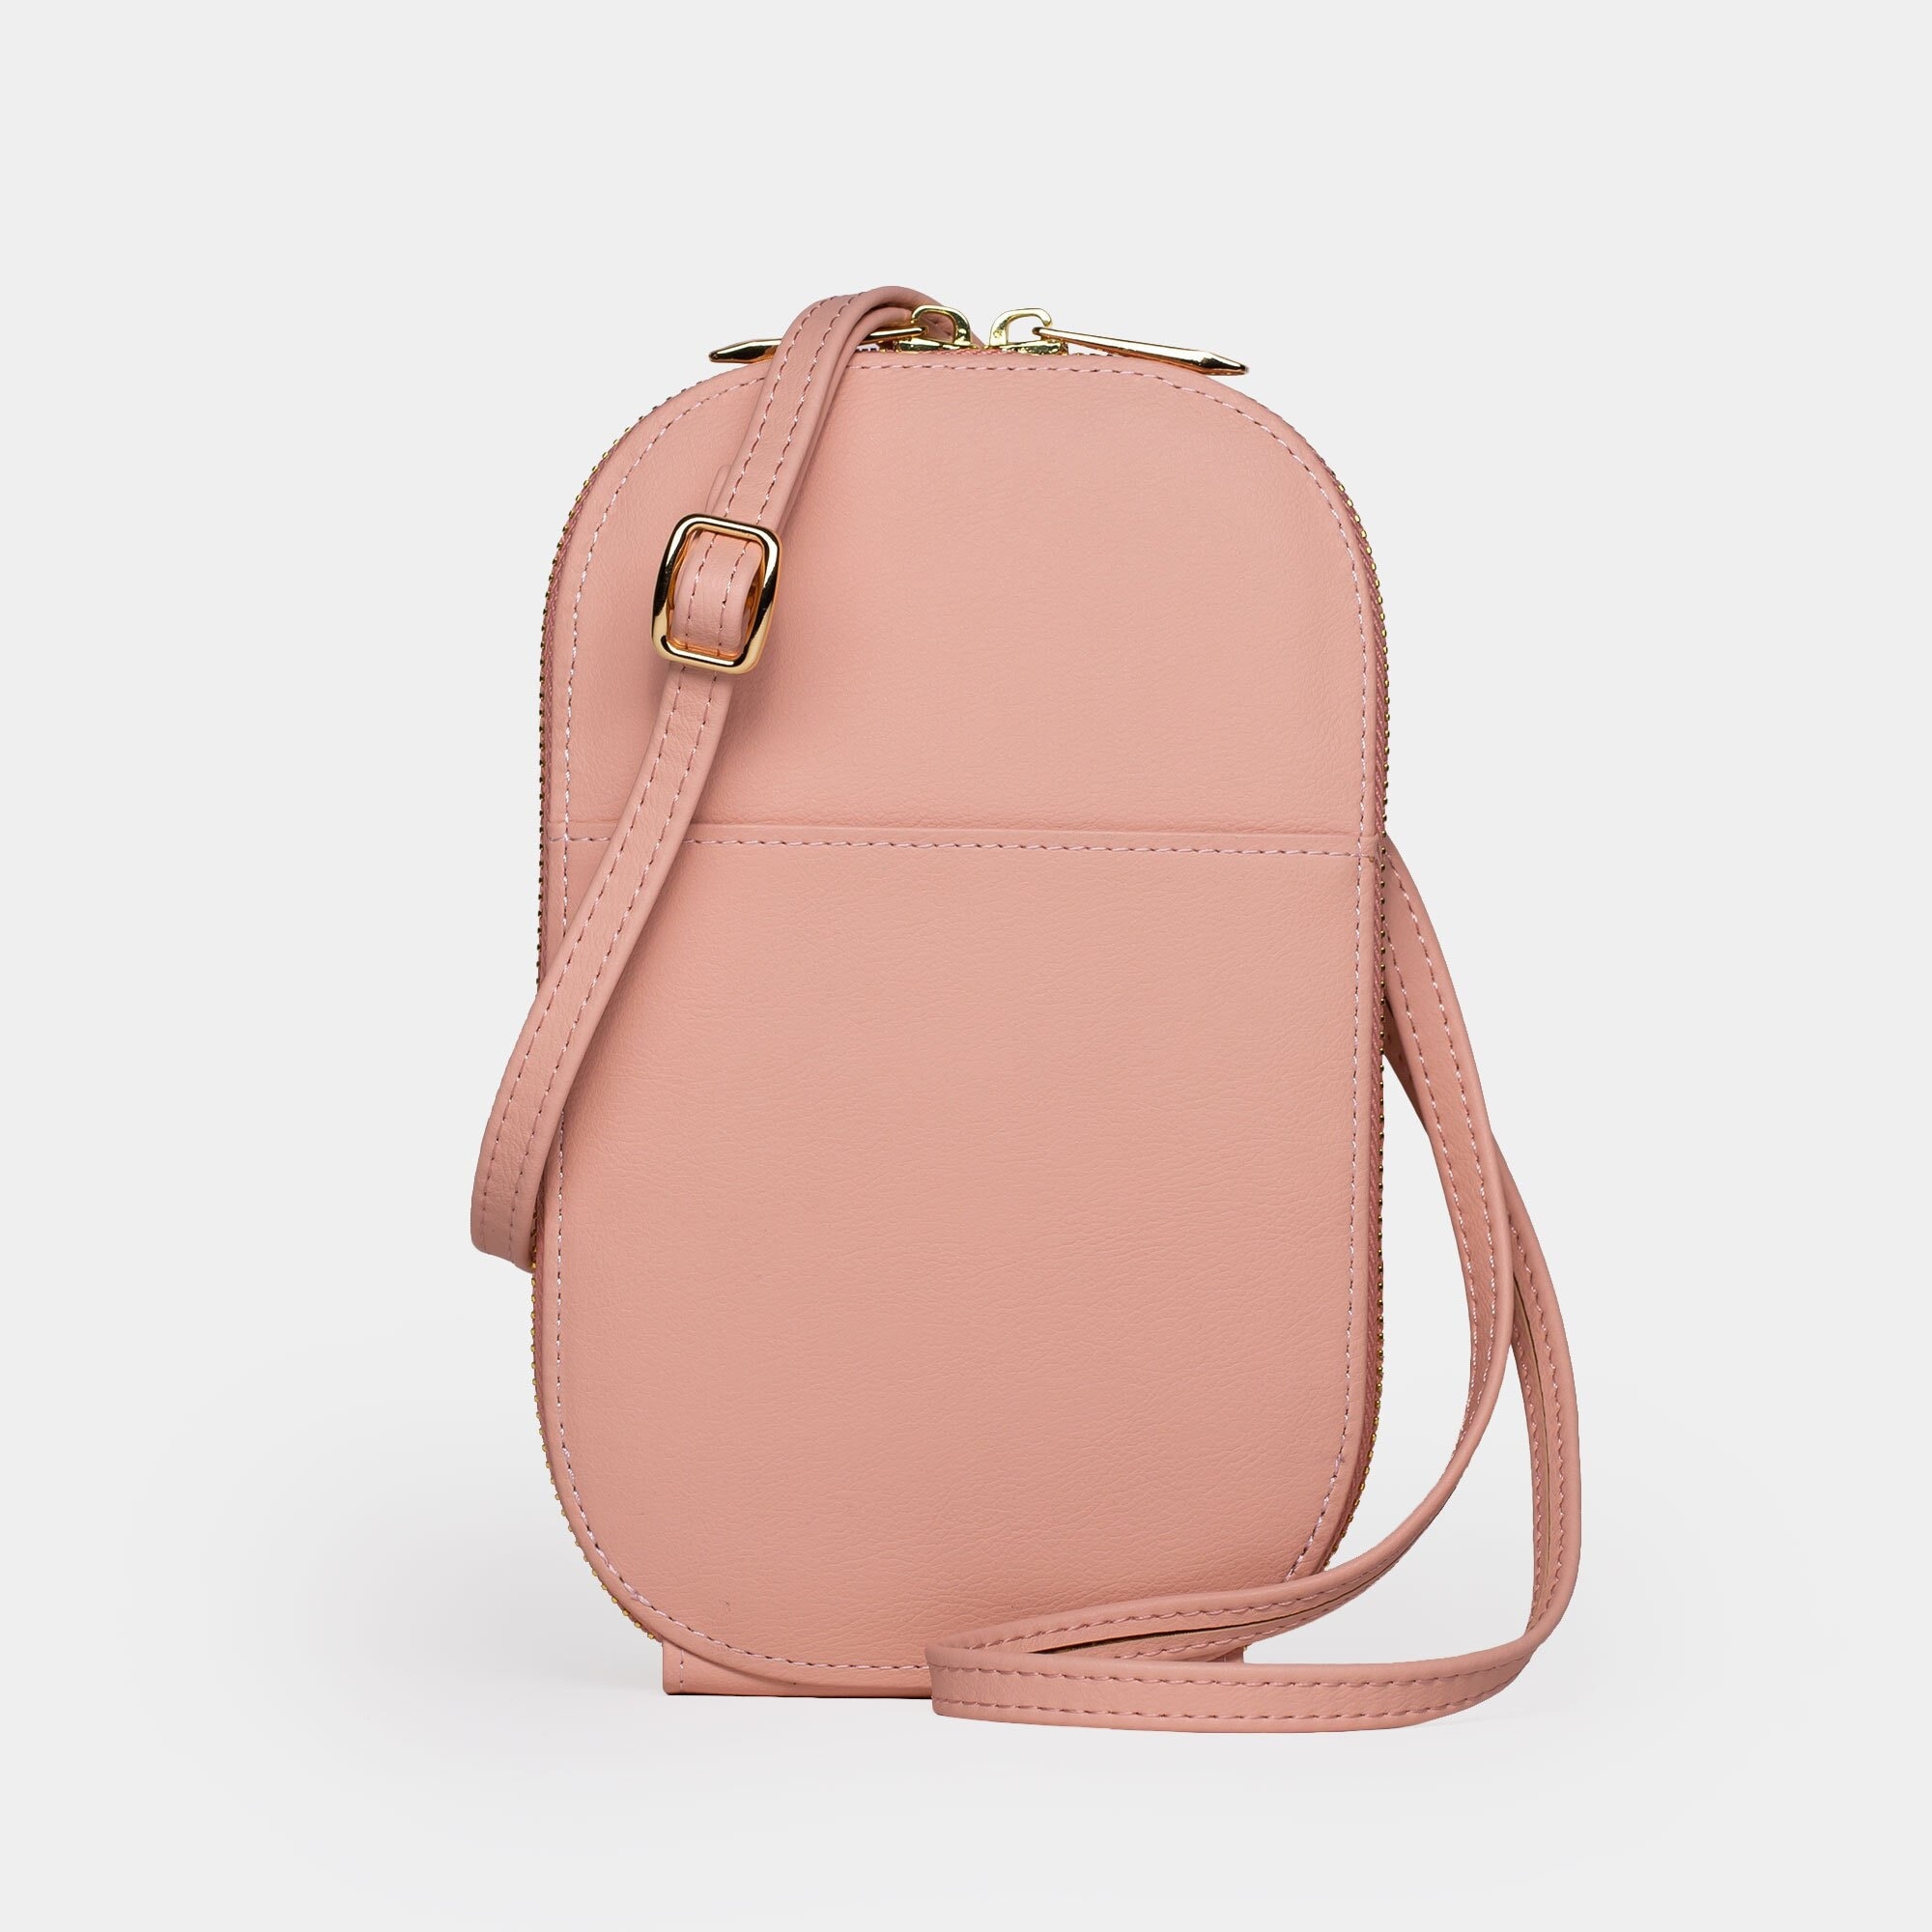 The Lorie Crossbody - Bubble Gum Pink – Ampere Creations